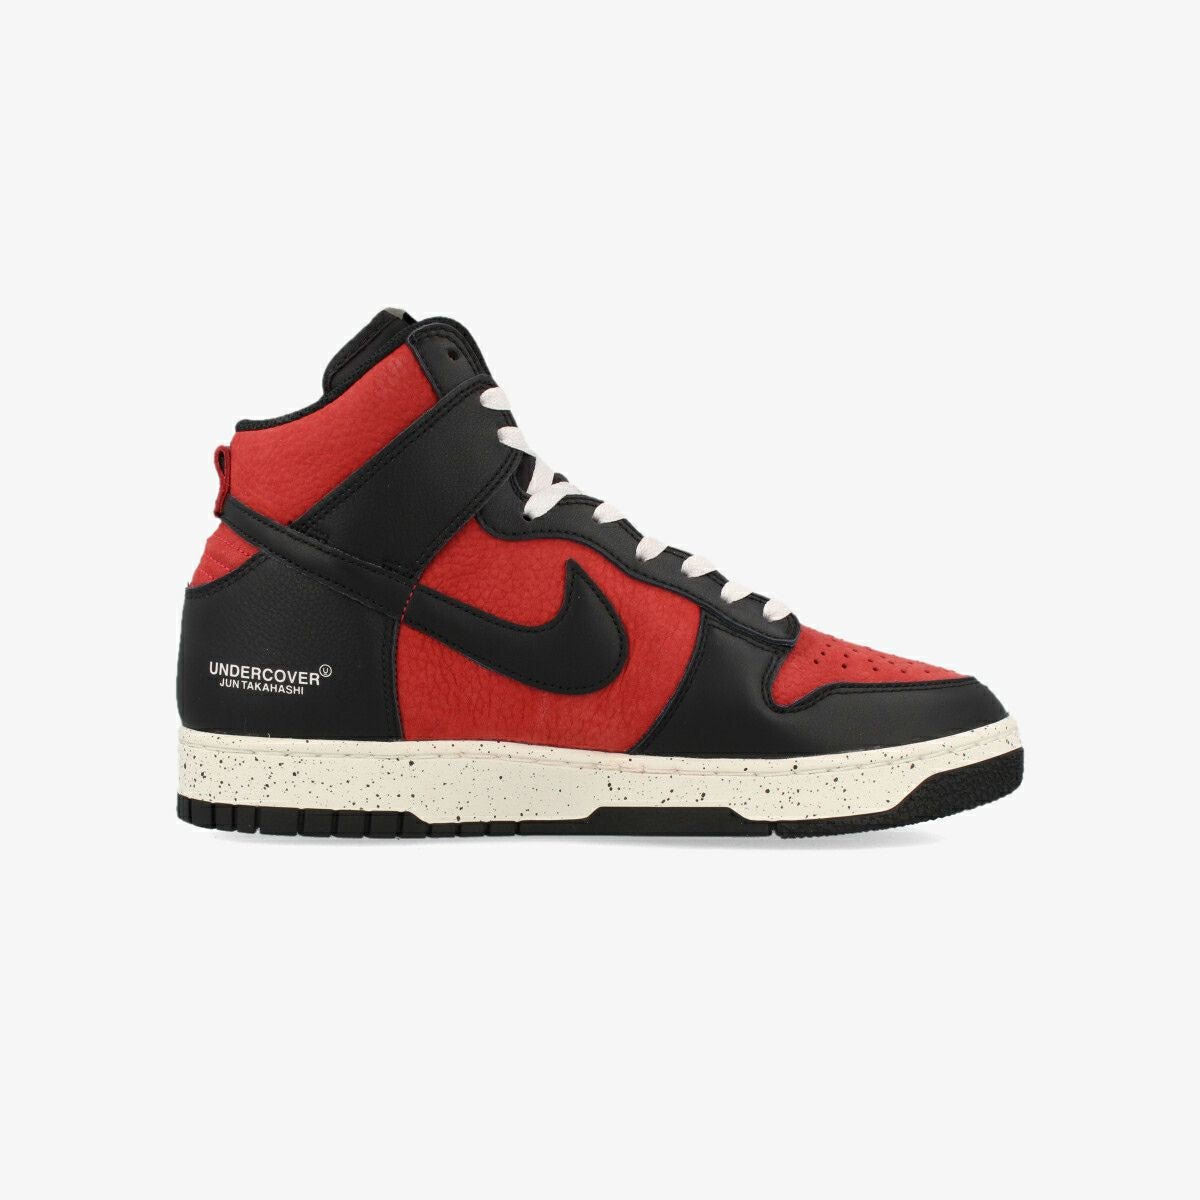 NIKE DUNK HIGH 1985 GYM RED/BLACK/WHITE [UNDERCOVER] dd9401-600